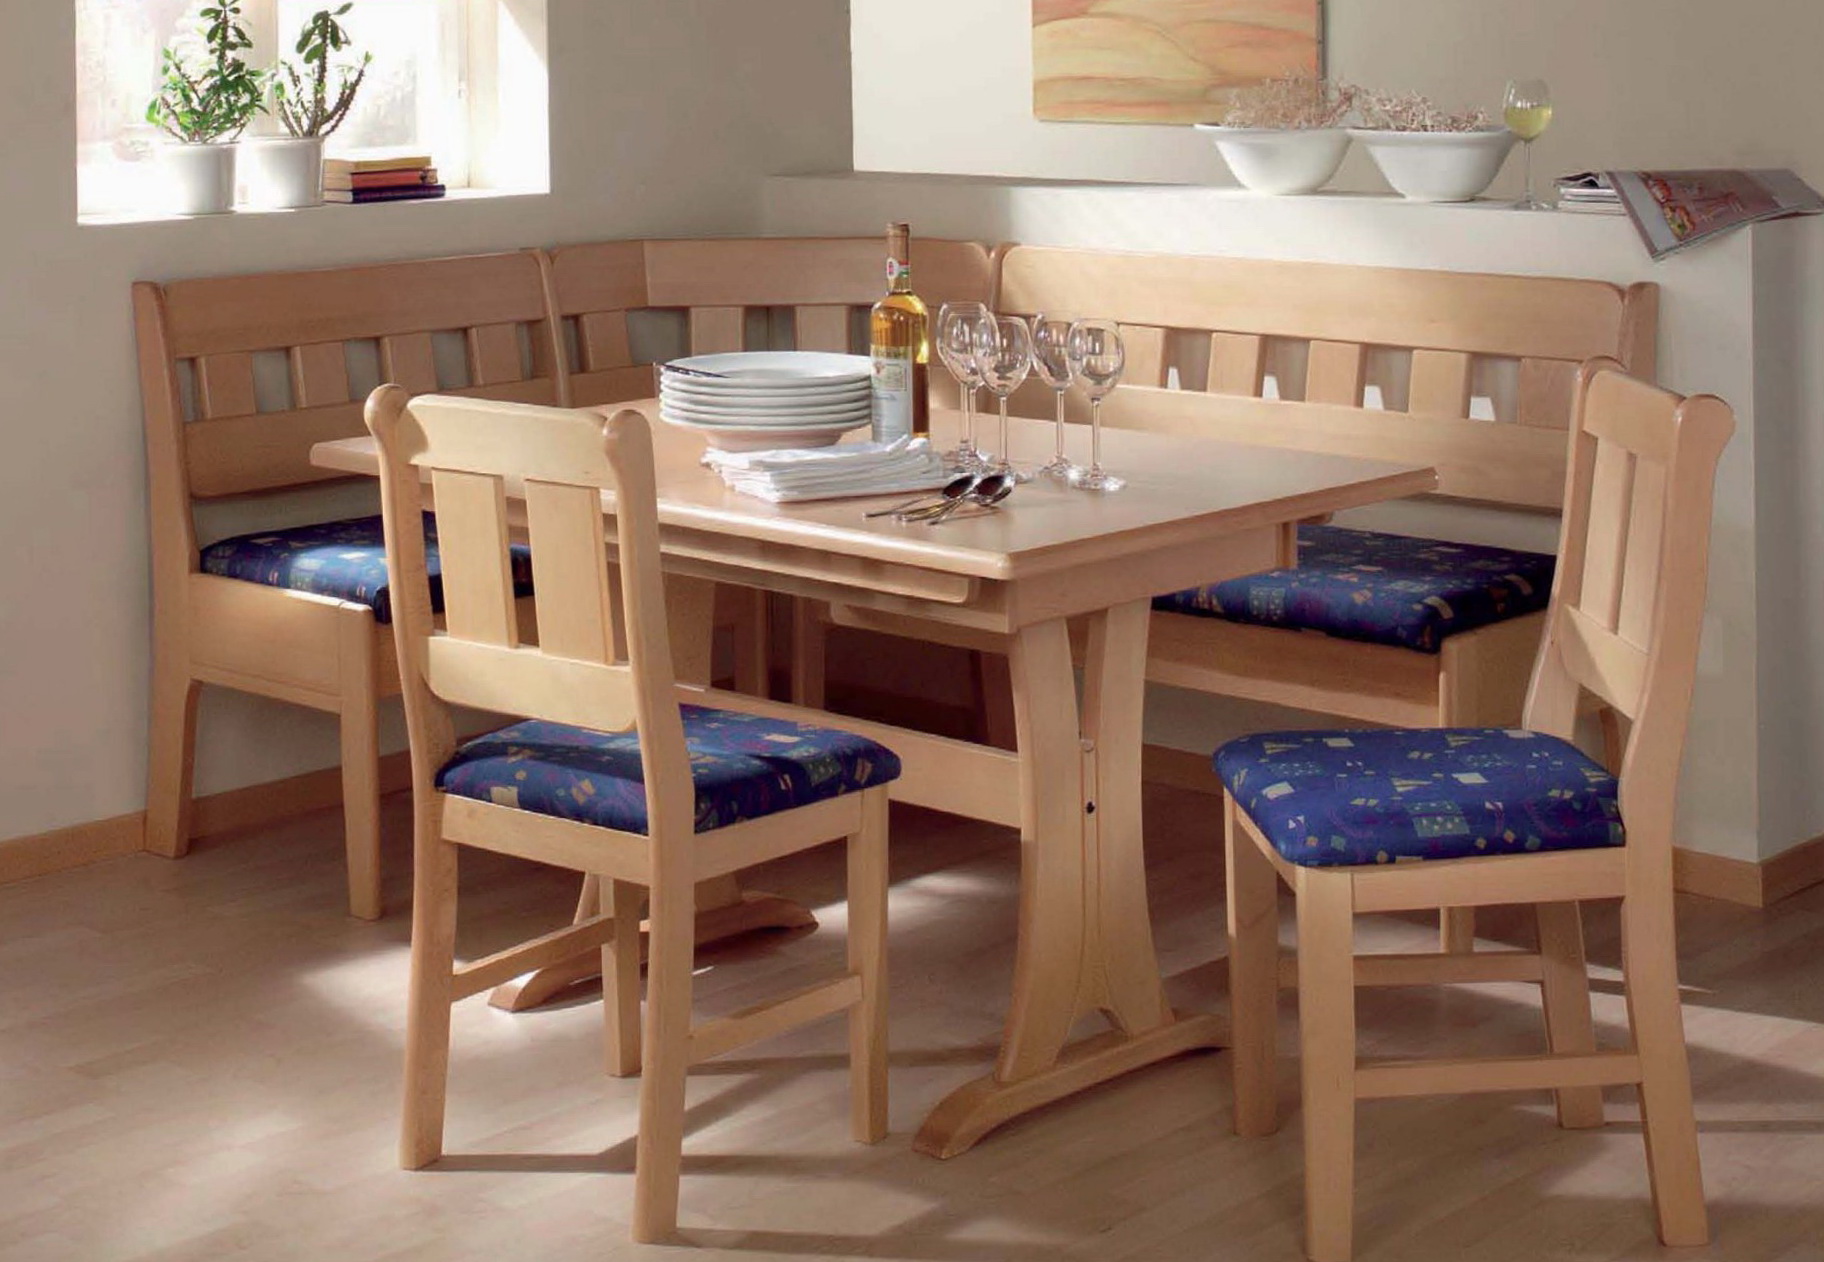 Breakfast Nook Benches For Sale | Home Design Ideas